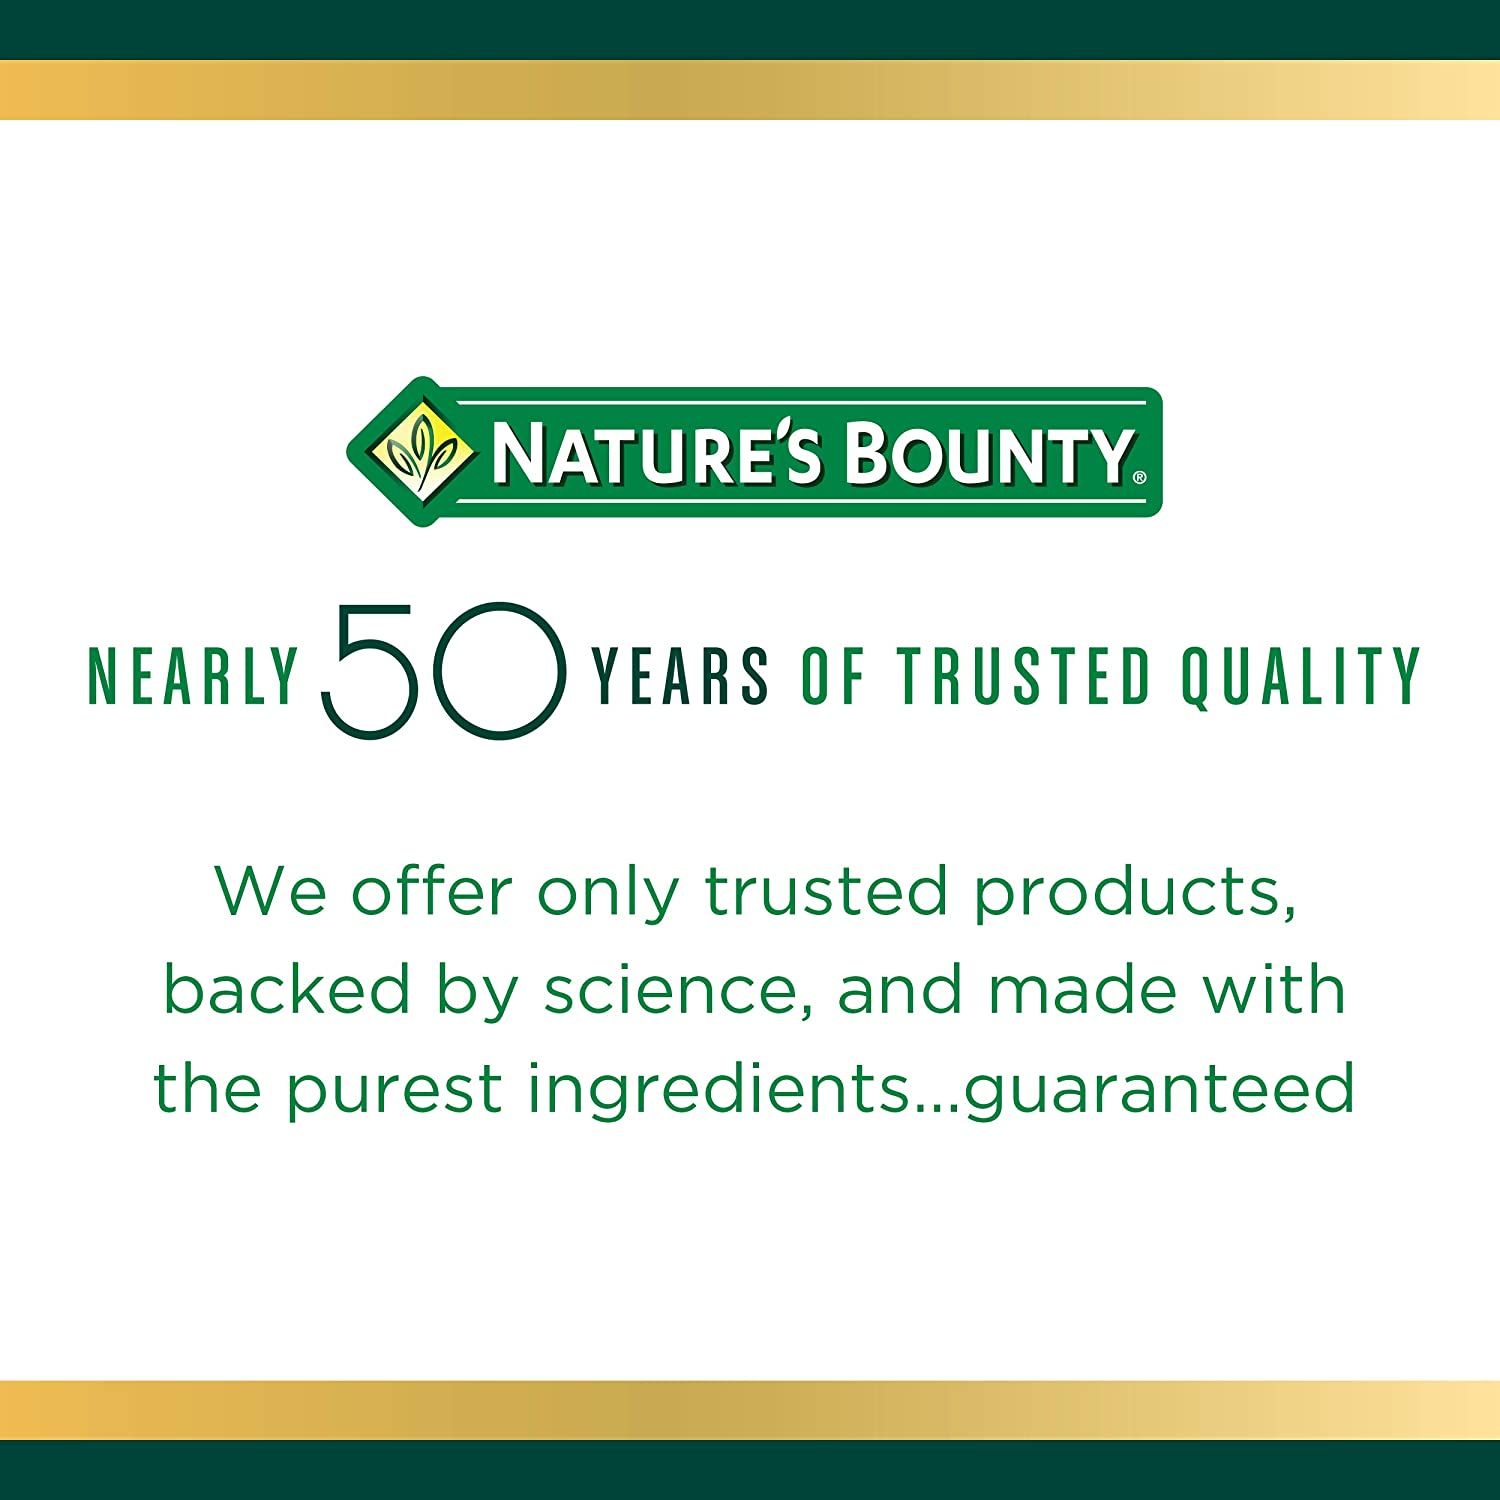 Nature's Bounty Extra Strength Hair, Skin & Nails Softgels - 150 ct